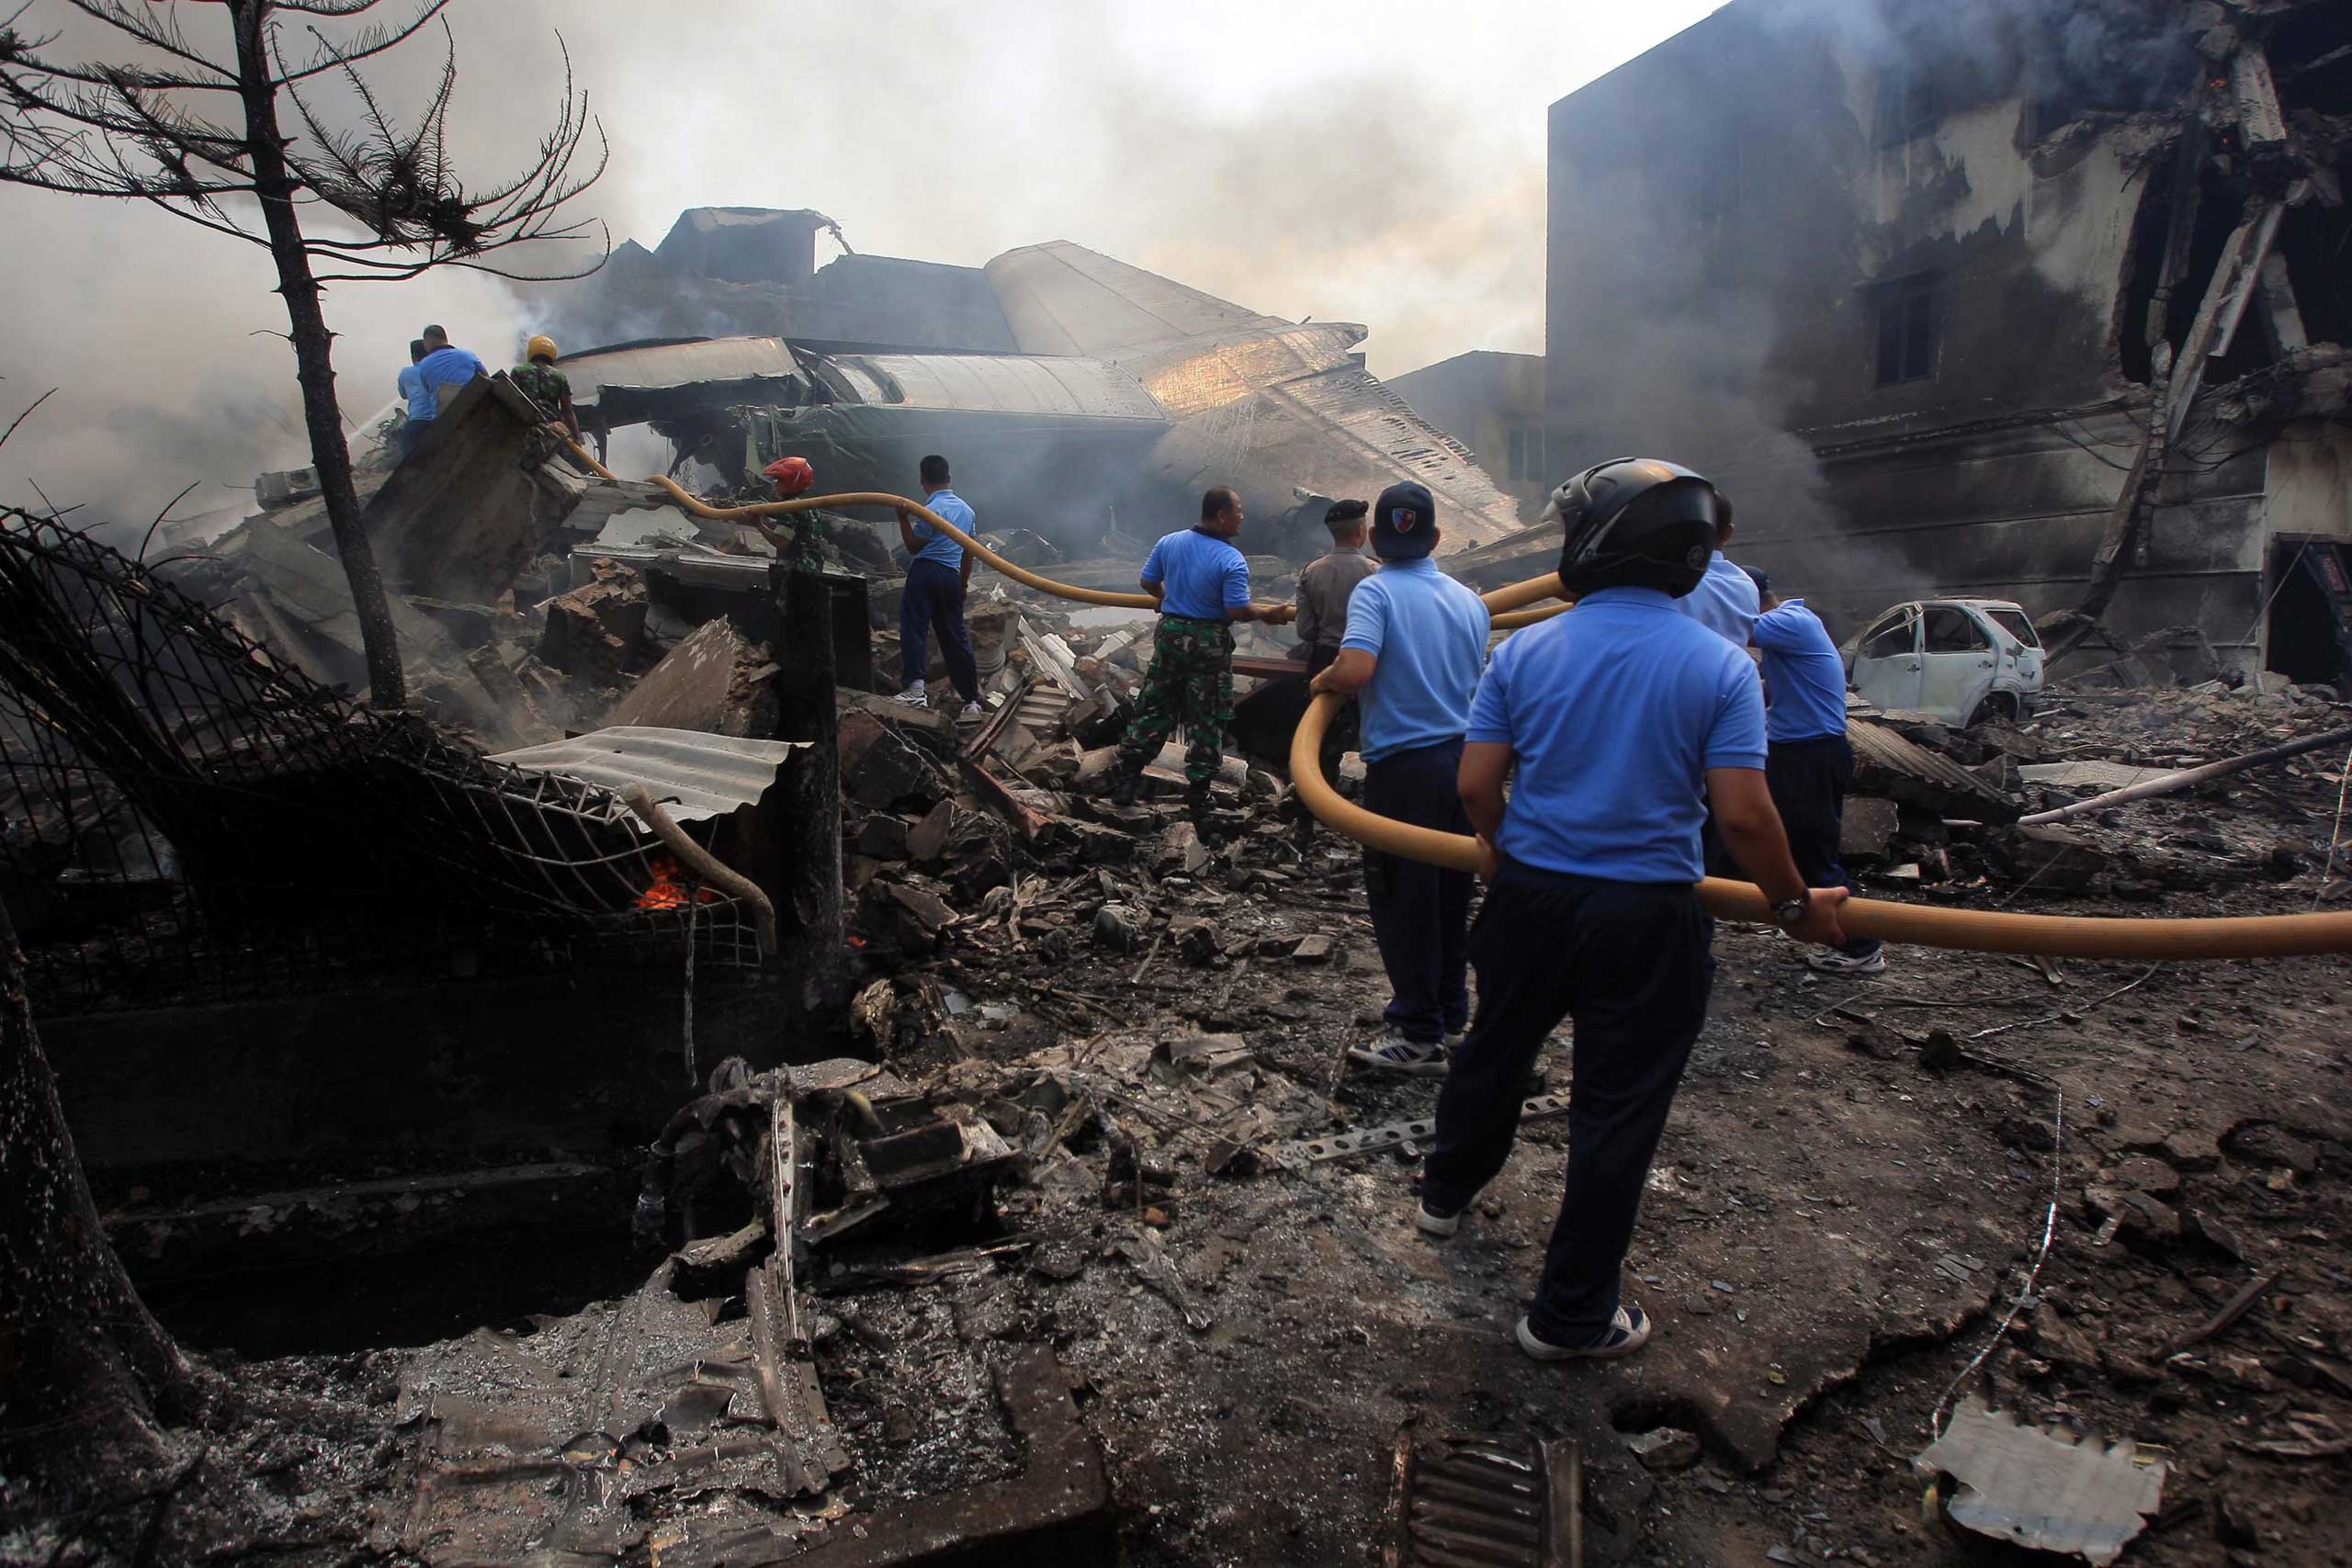 Rescuers extinguish a fire after a military airplane crashed during their search for victims in Medan, Indonesia, on June 30 2015.